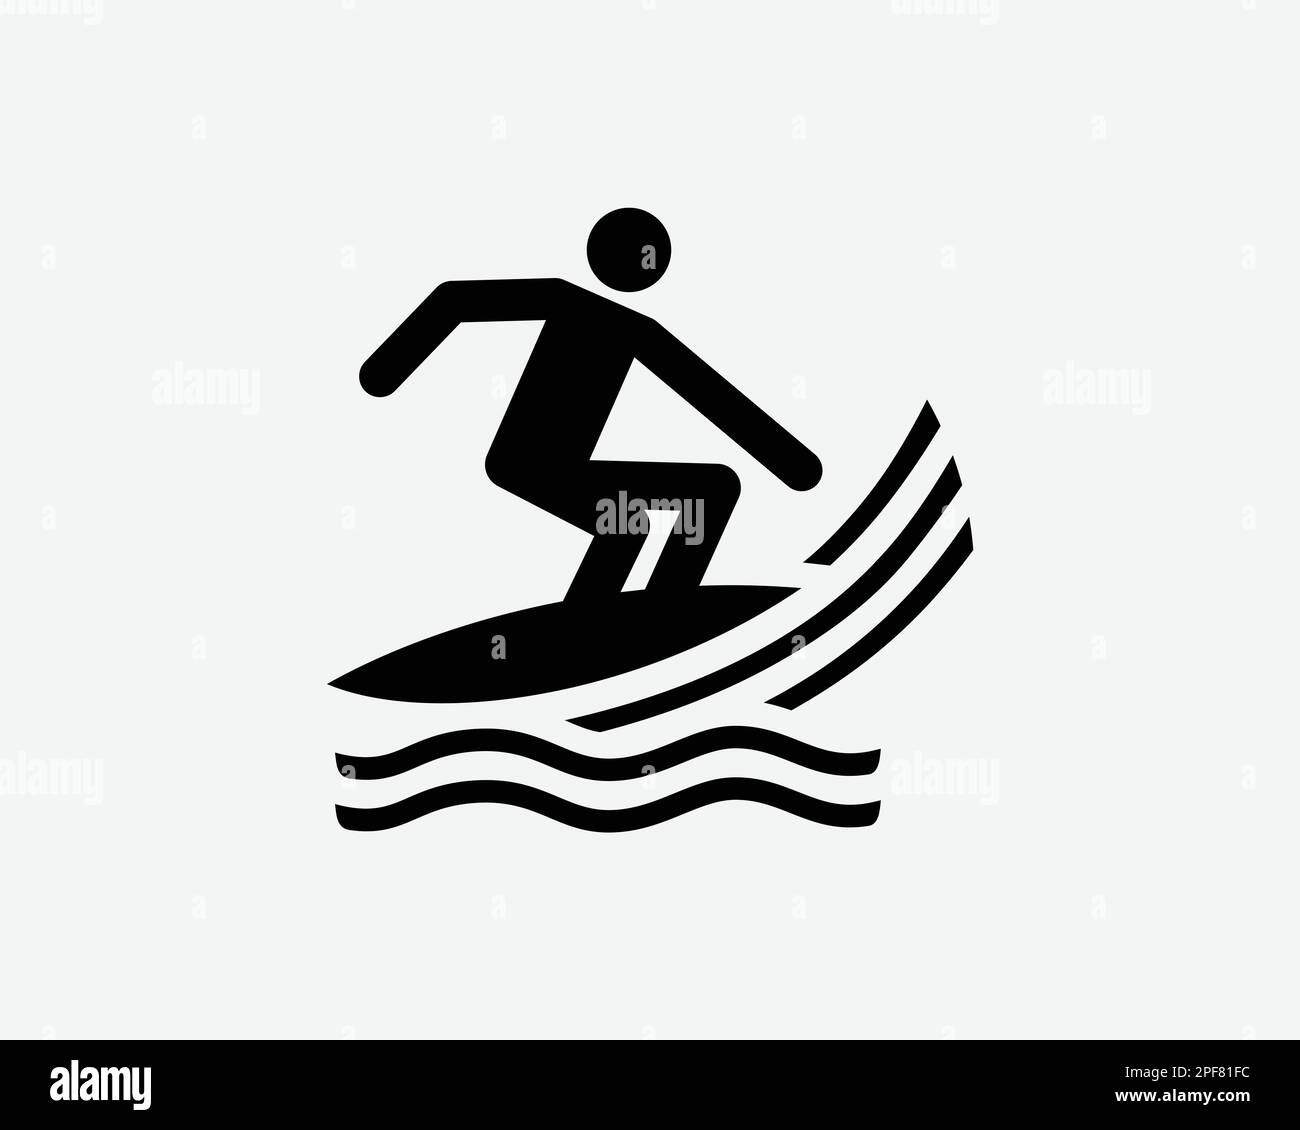 Surfing Icon Surf Boarding Board Surfer Water Sports Activity Vector Black White Silhouette Symbol Sign Graphic Clipart Artwork Illustration Pictogram Stock Vector